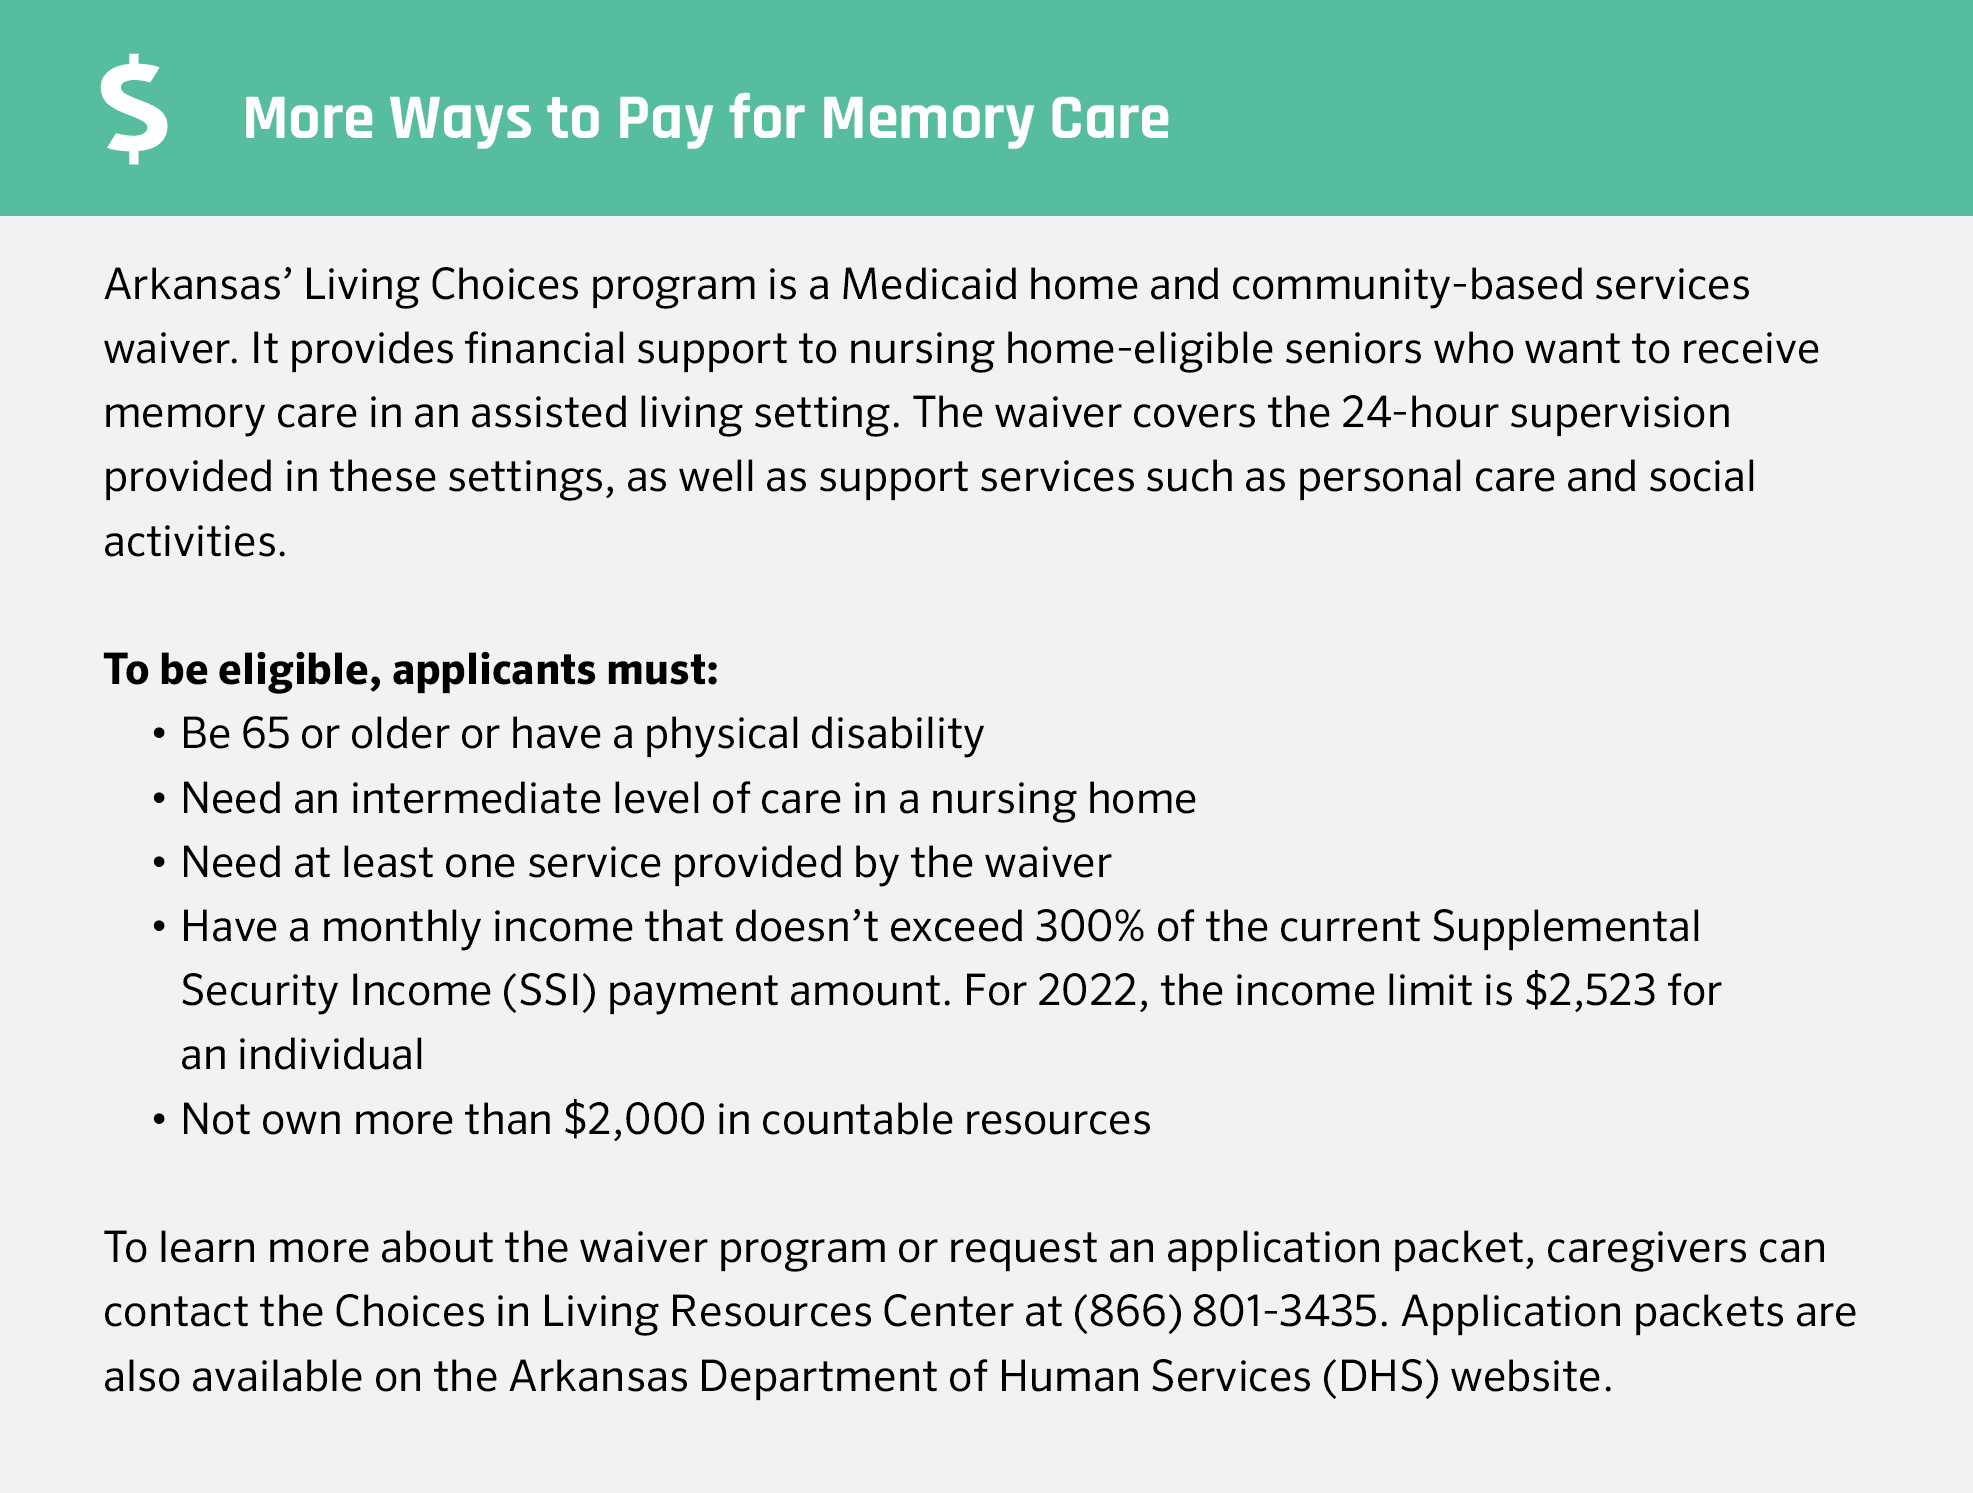 More ways to pay for memory care in Arkansas